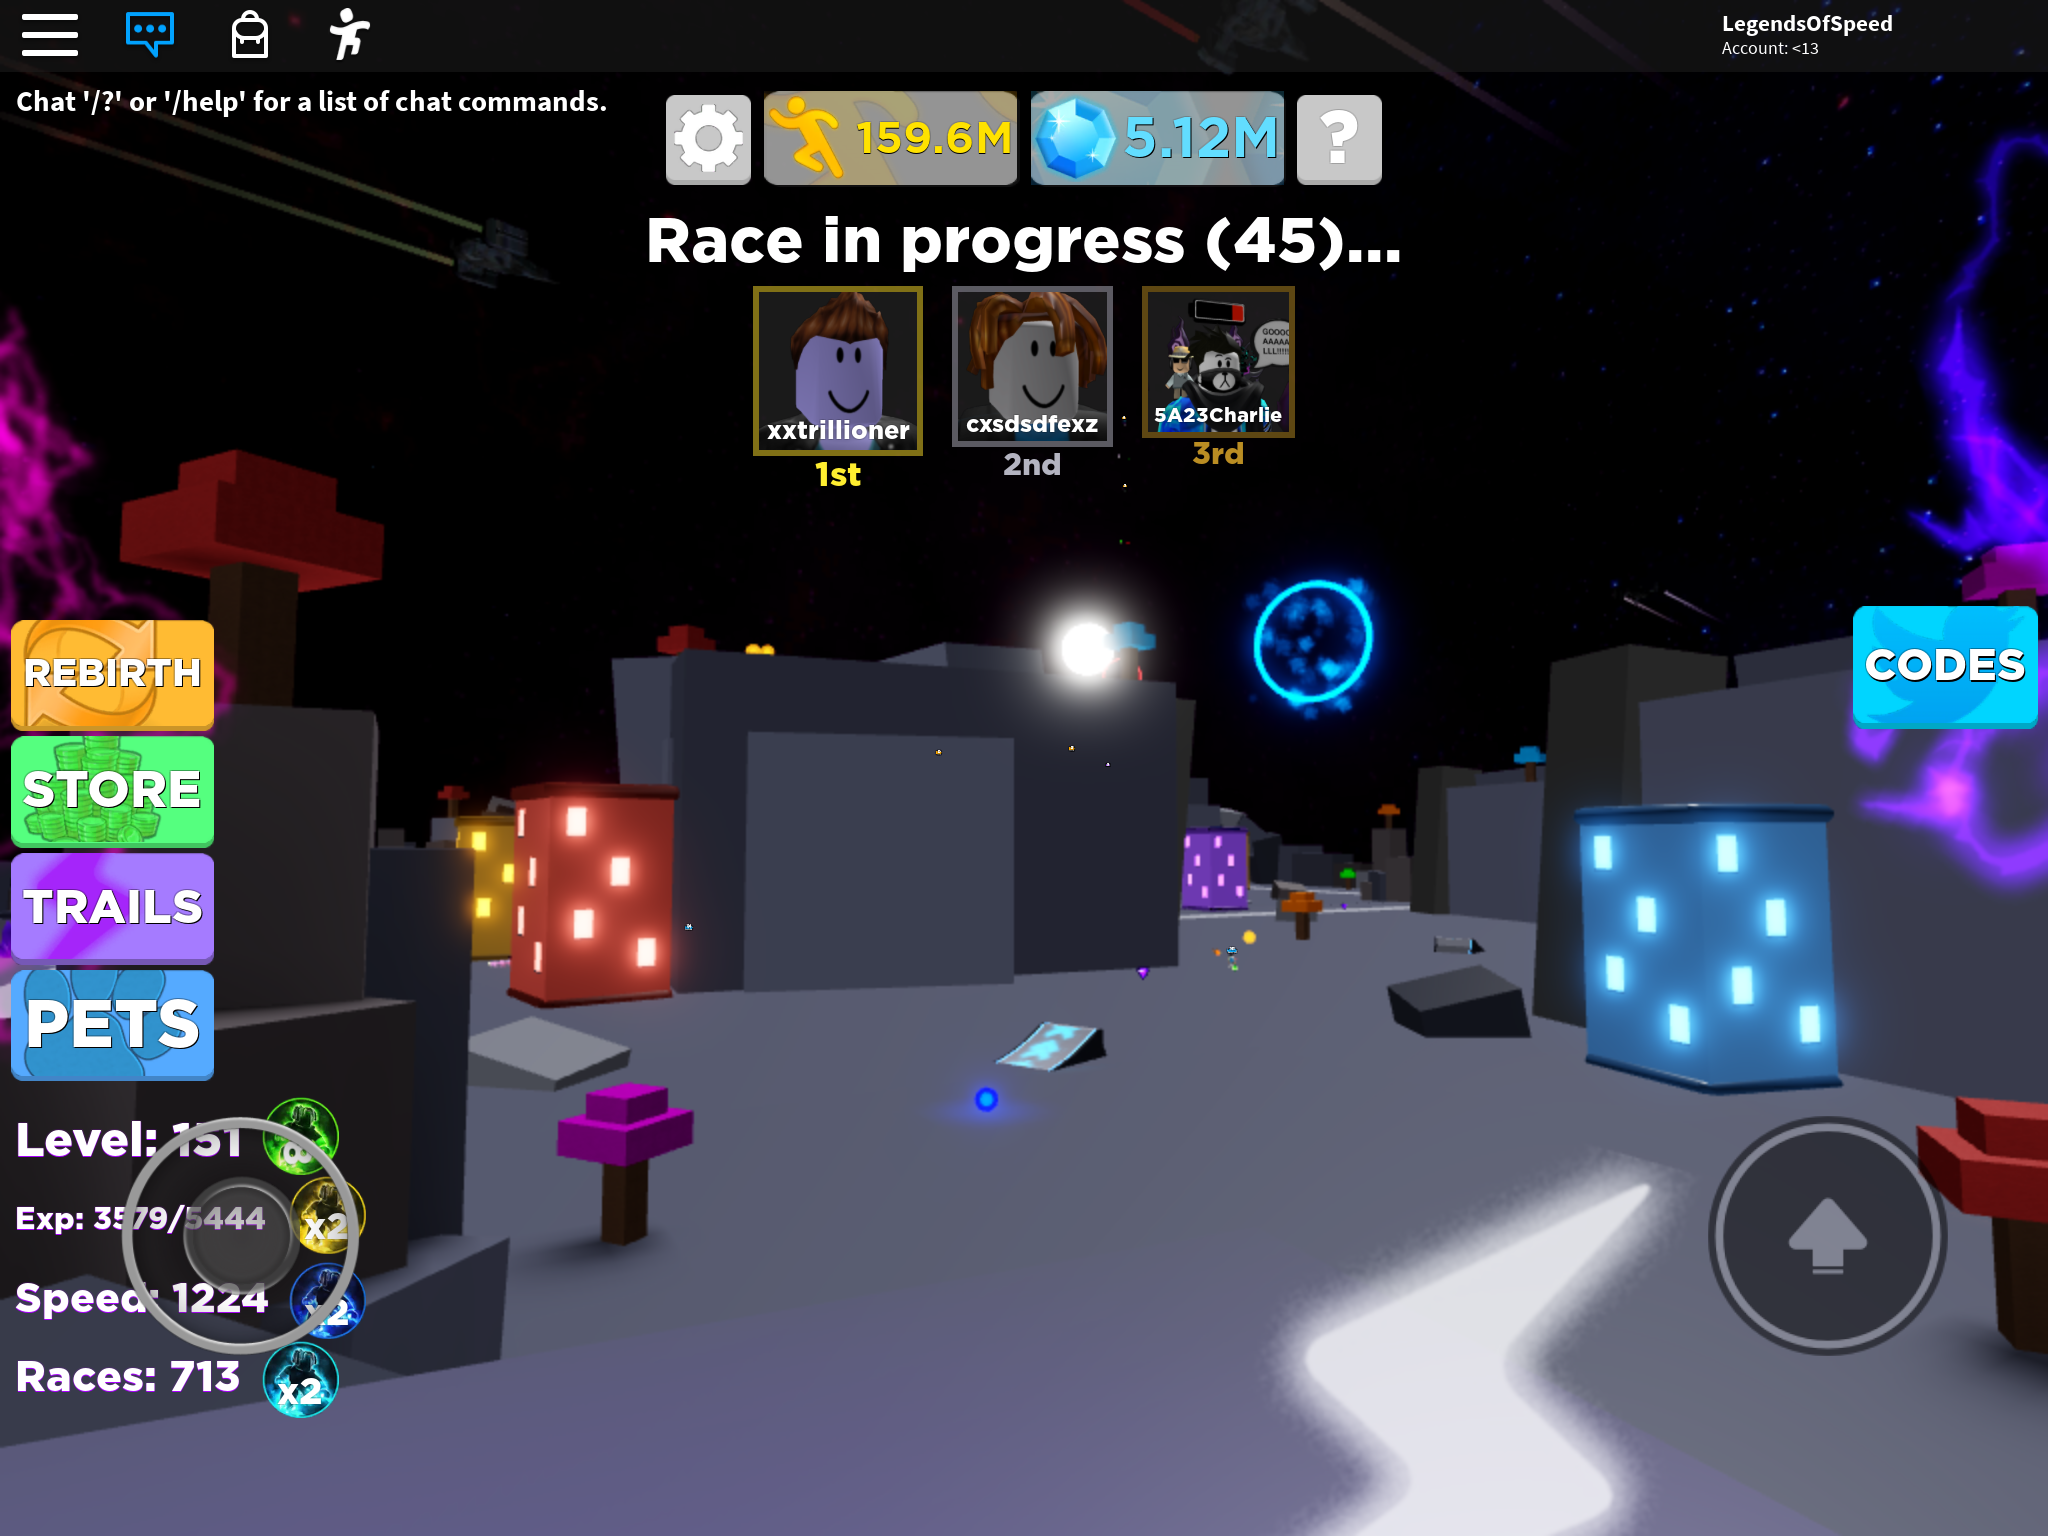 Outer Space Legends Of Speed Wiki Fandom - codes for roblox legend of speed